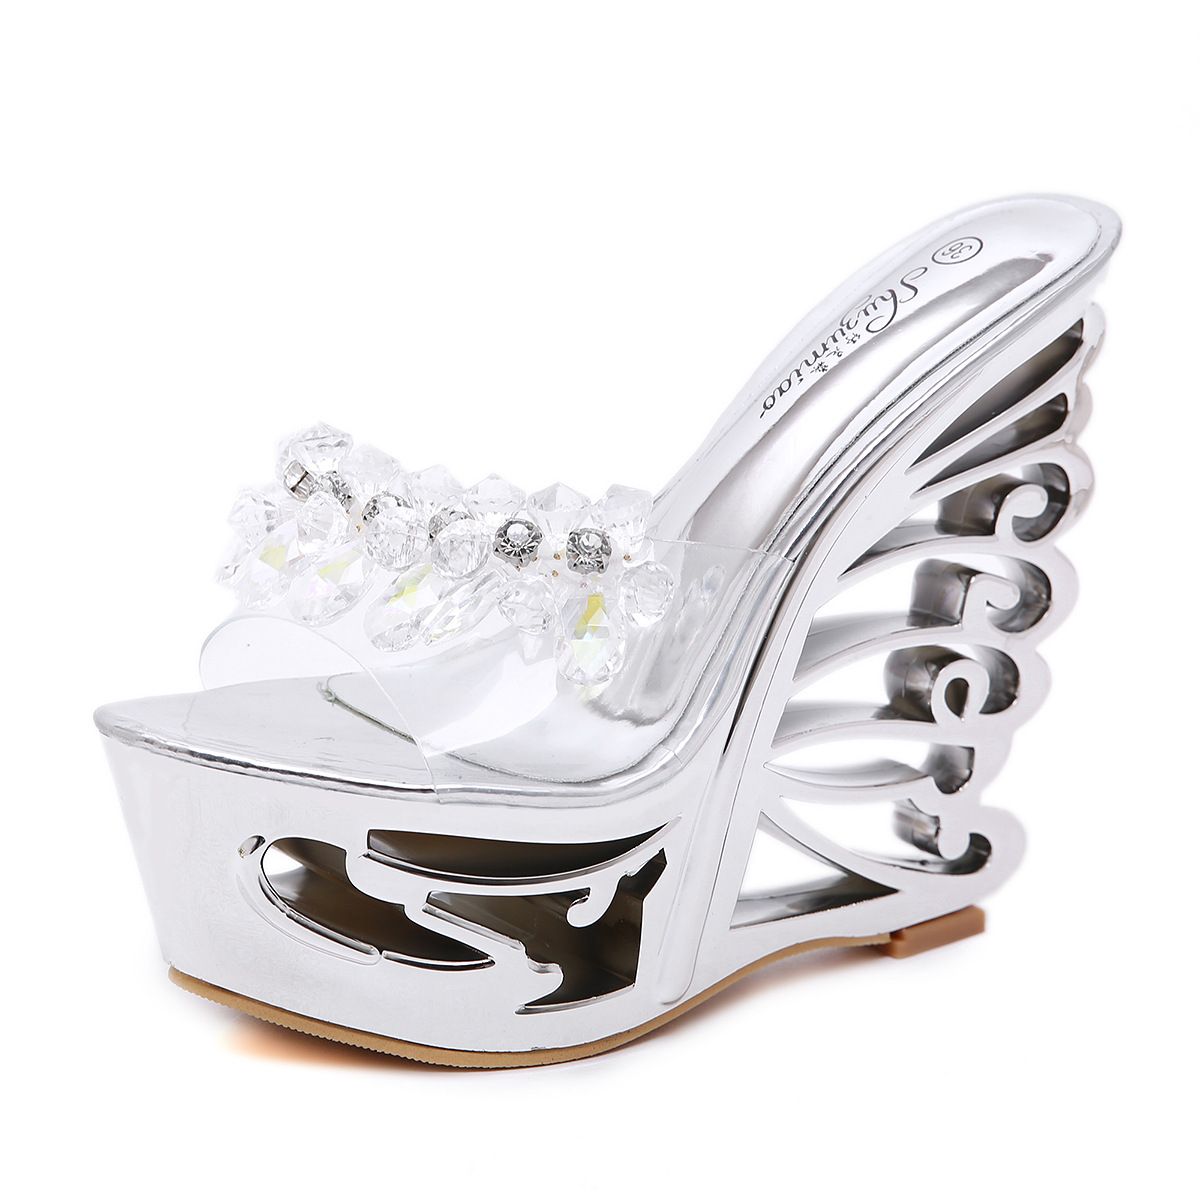 silver wedge sandals canada